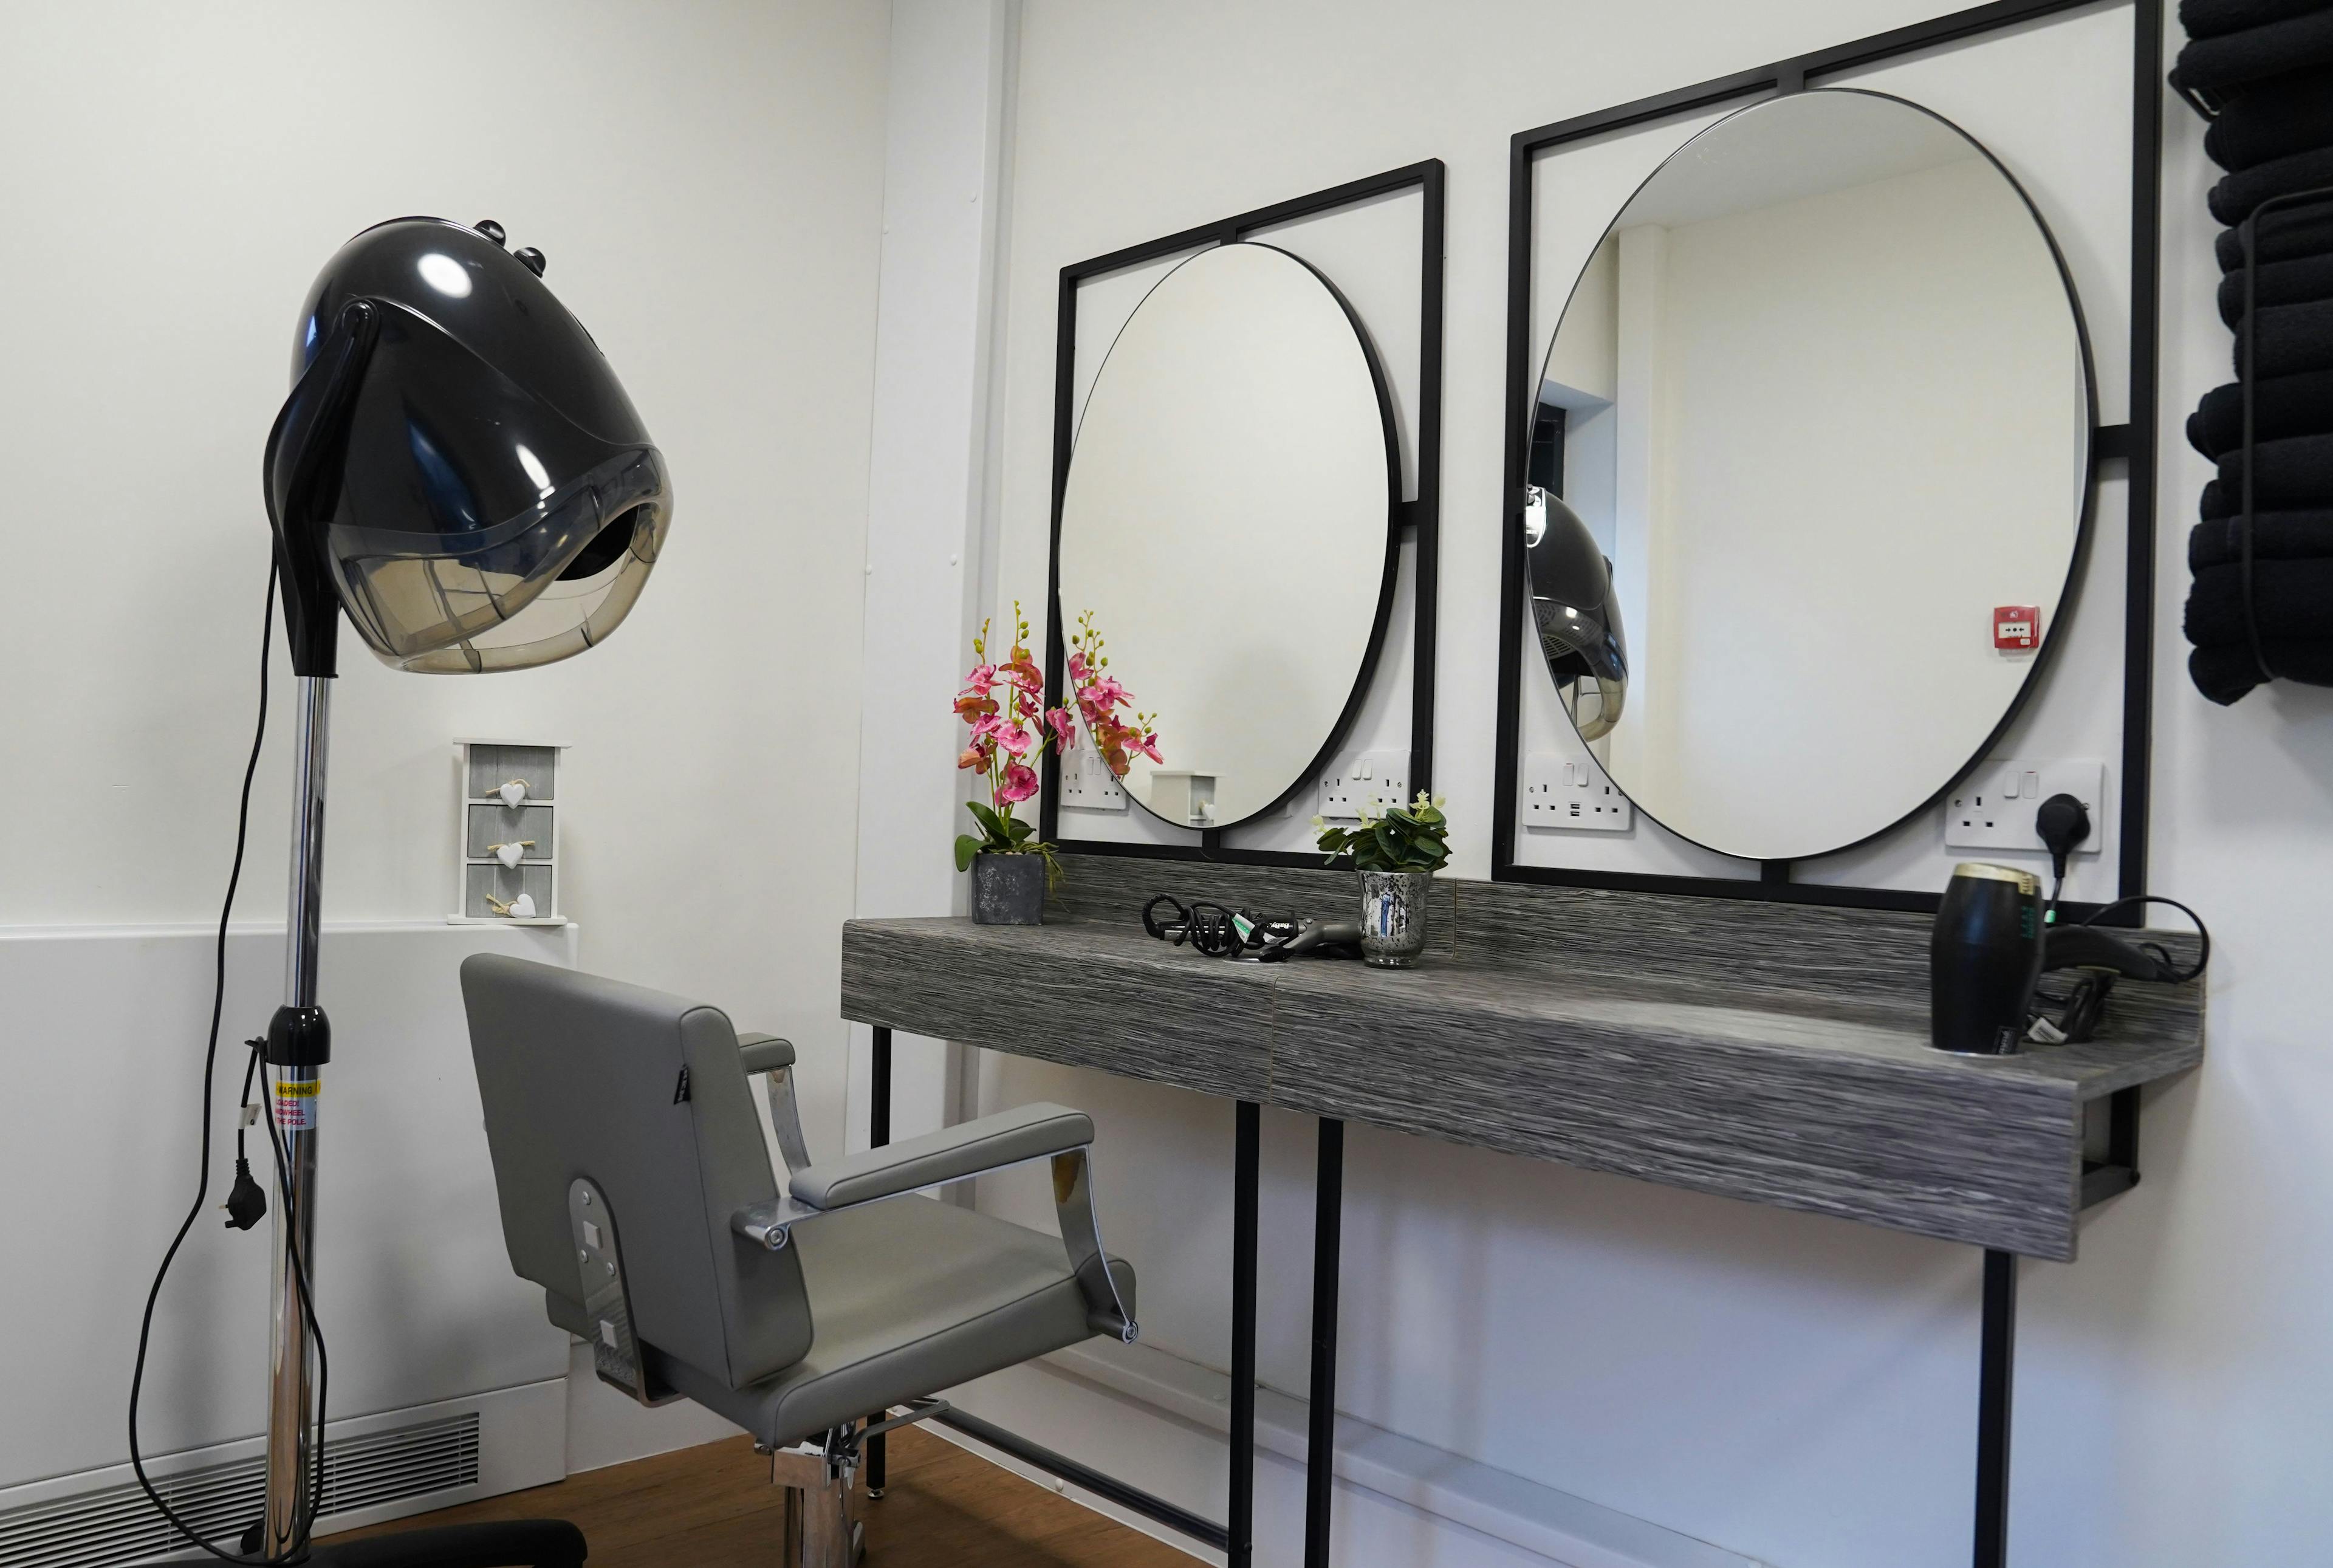 Salon at Broadmeadow Court Care Home in Newcastle-under-Lyme, Staffordshire